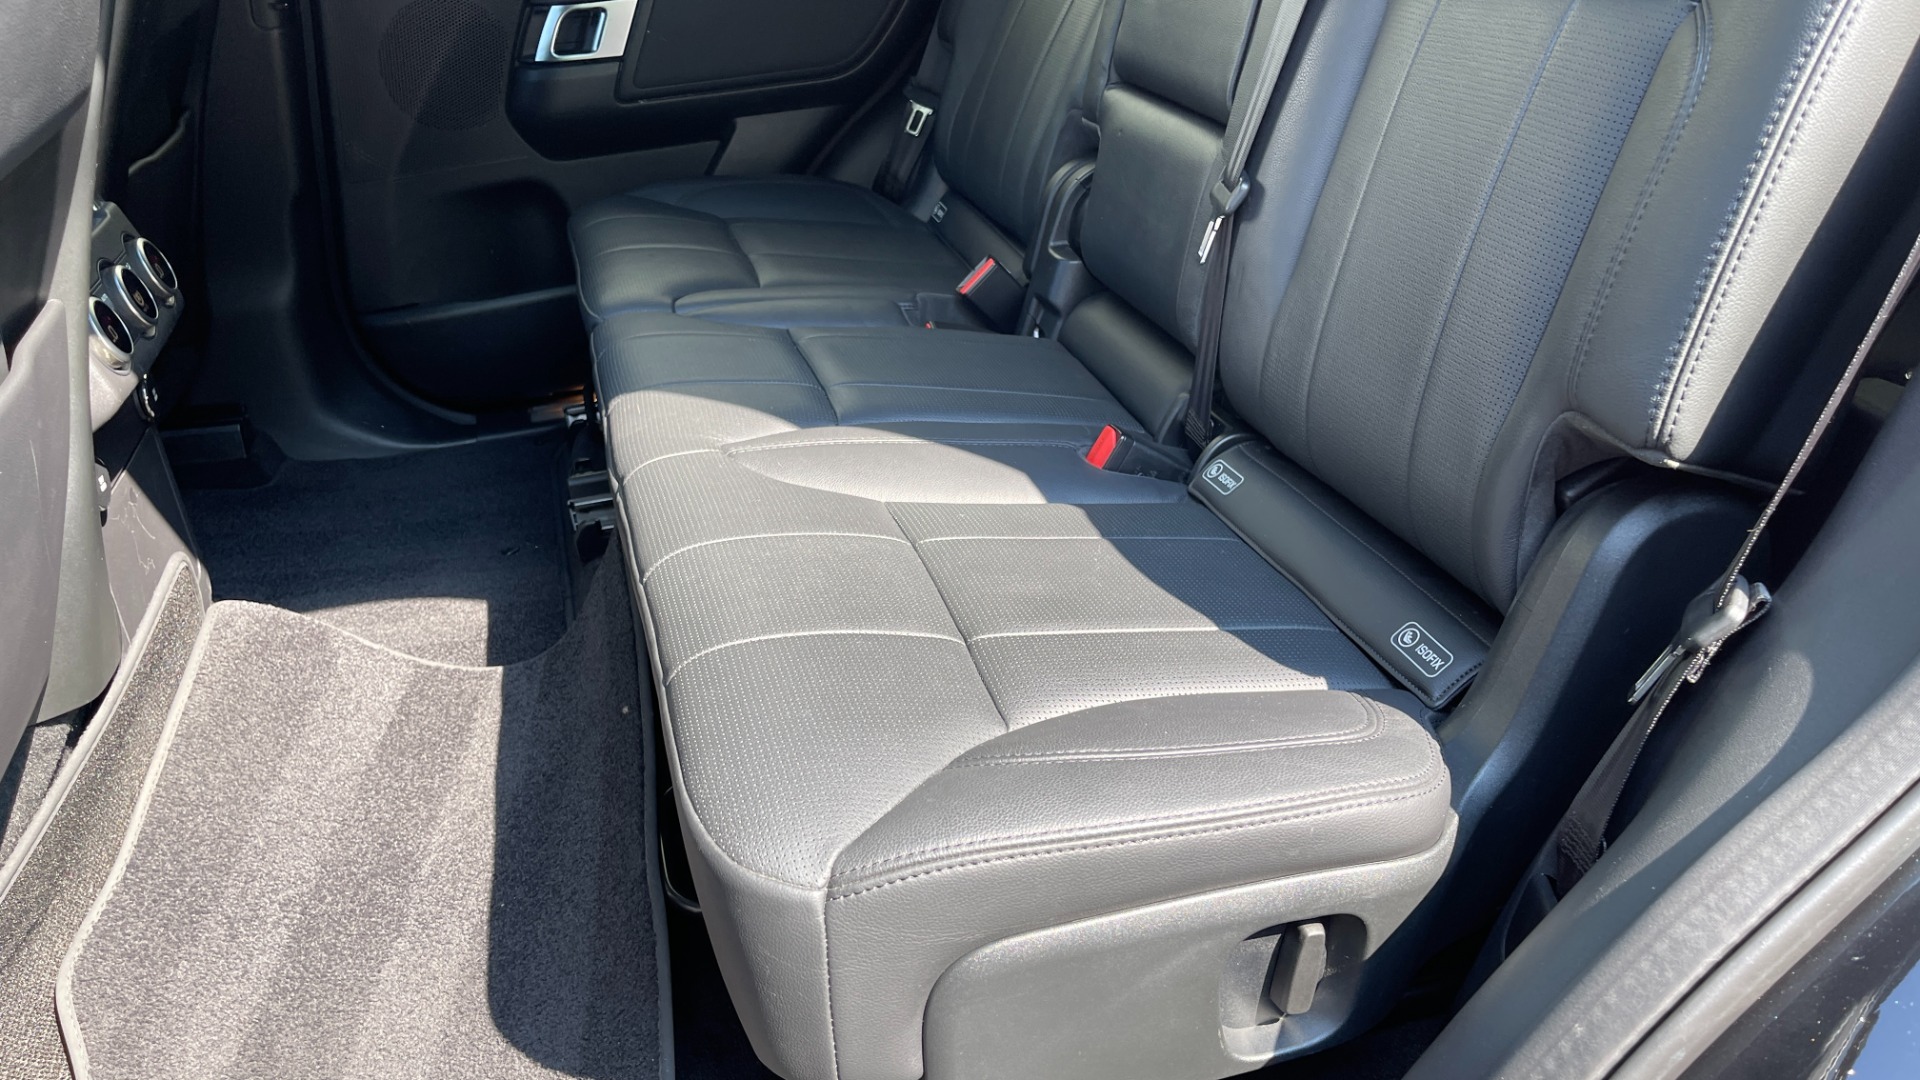 Used 2019 Land Rover Discovery HSE / SEVEN SEAT / DYNAMIC PACKAGE / 21IN WHEELS / REMOTE SEAT PACKAGE for sale $46,495 at Formula Imports in Charlotte NC 28227 13